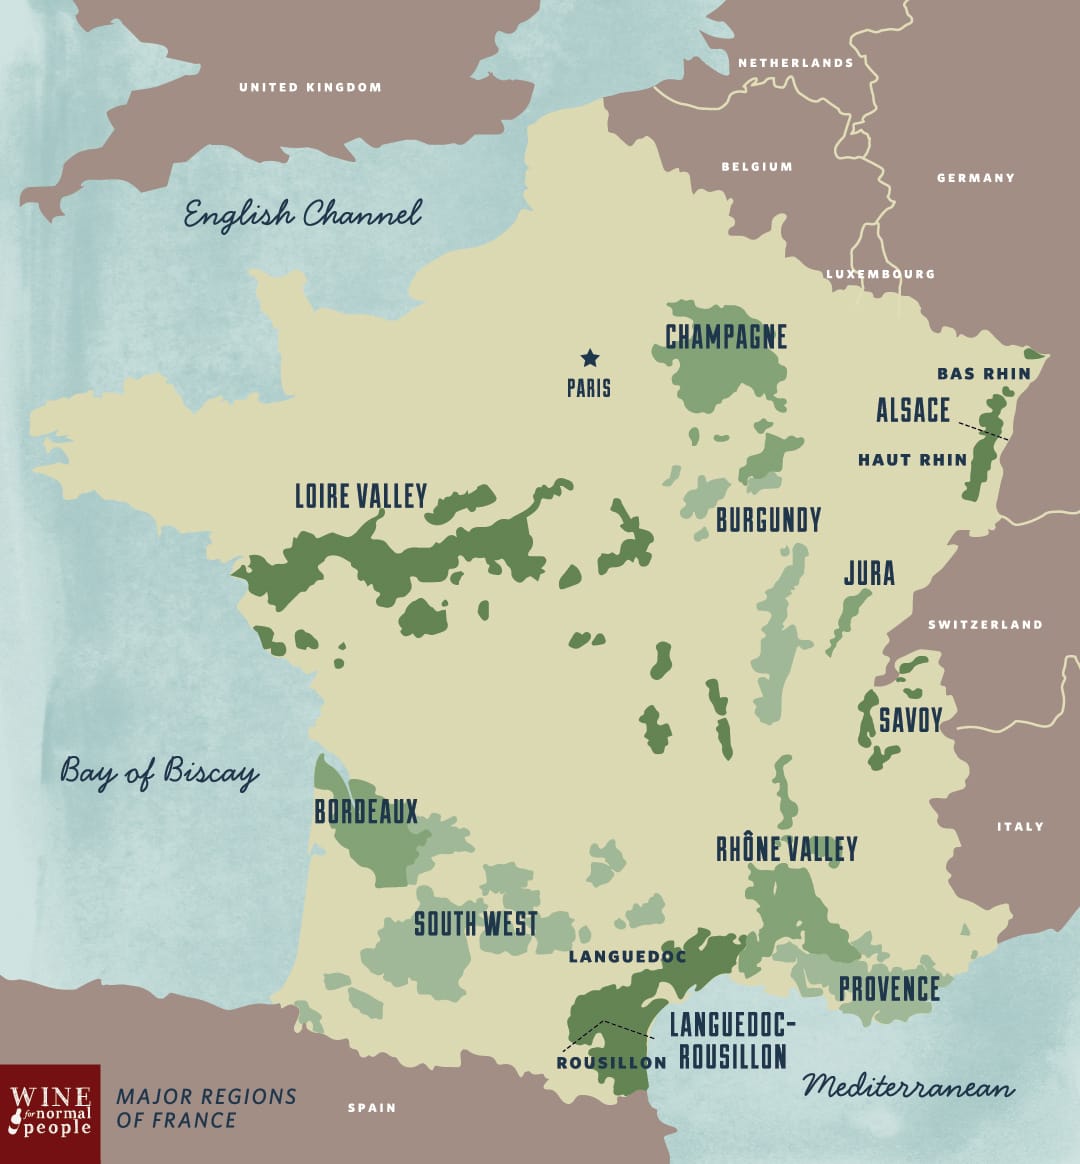 Old World Maps: European Wine Regions | Wine For Normal People